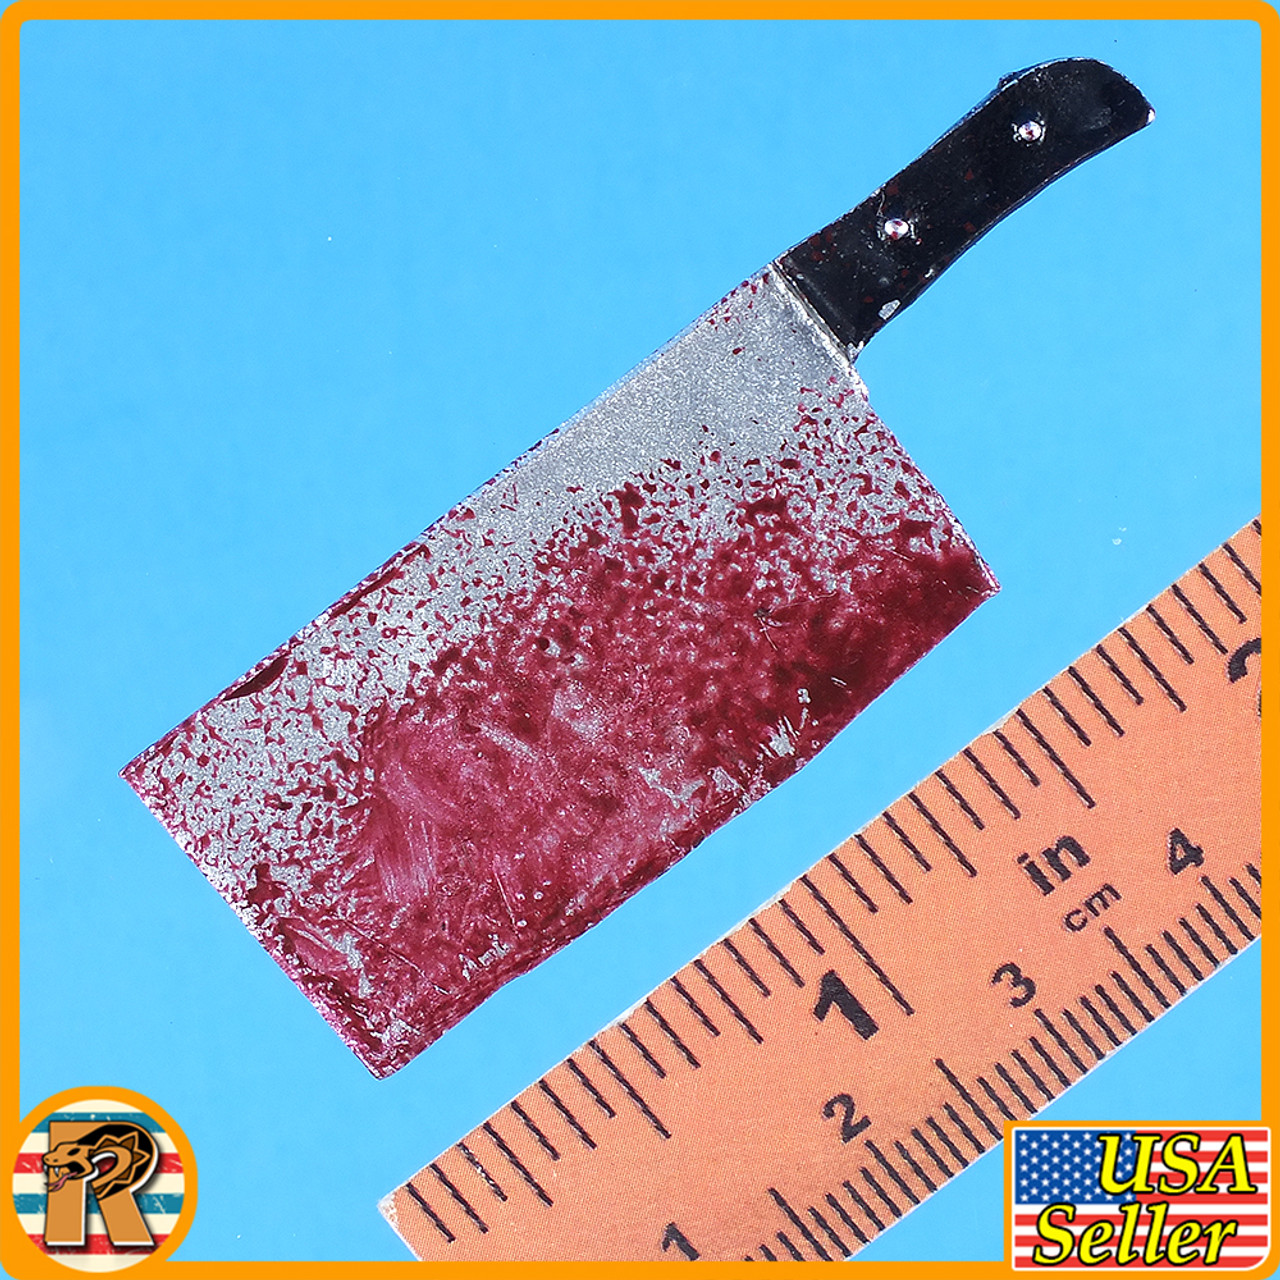 Leatherface - Metal Cleaver #1 - 1/6 Scale